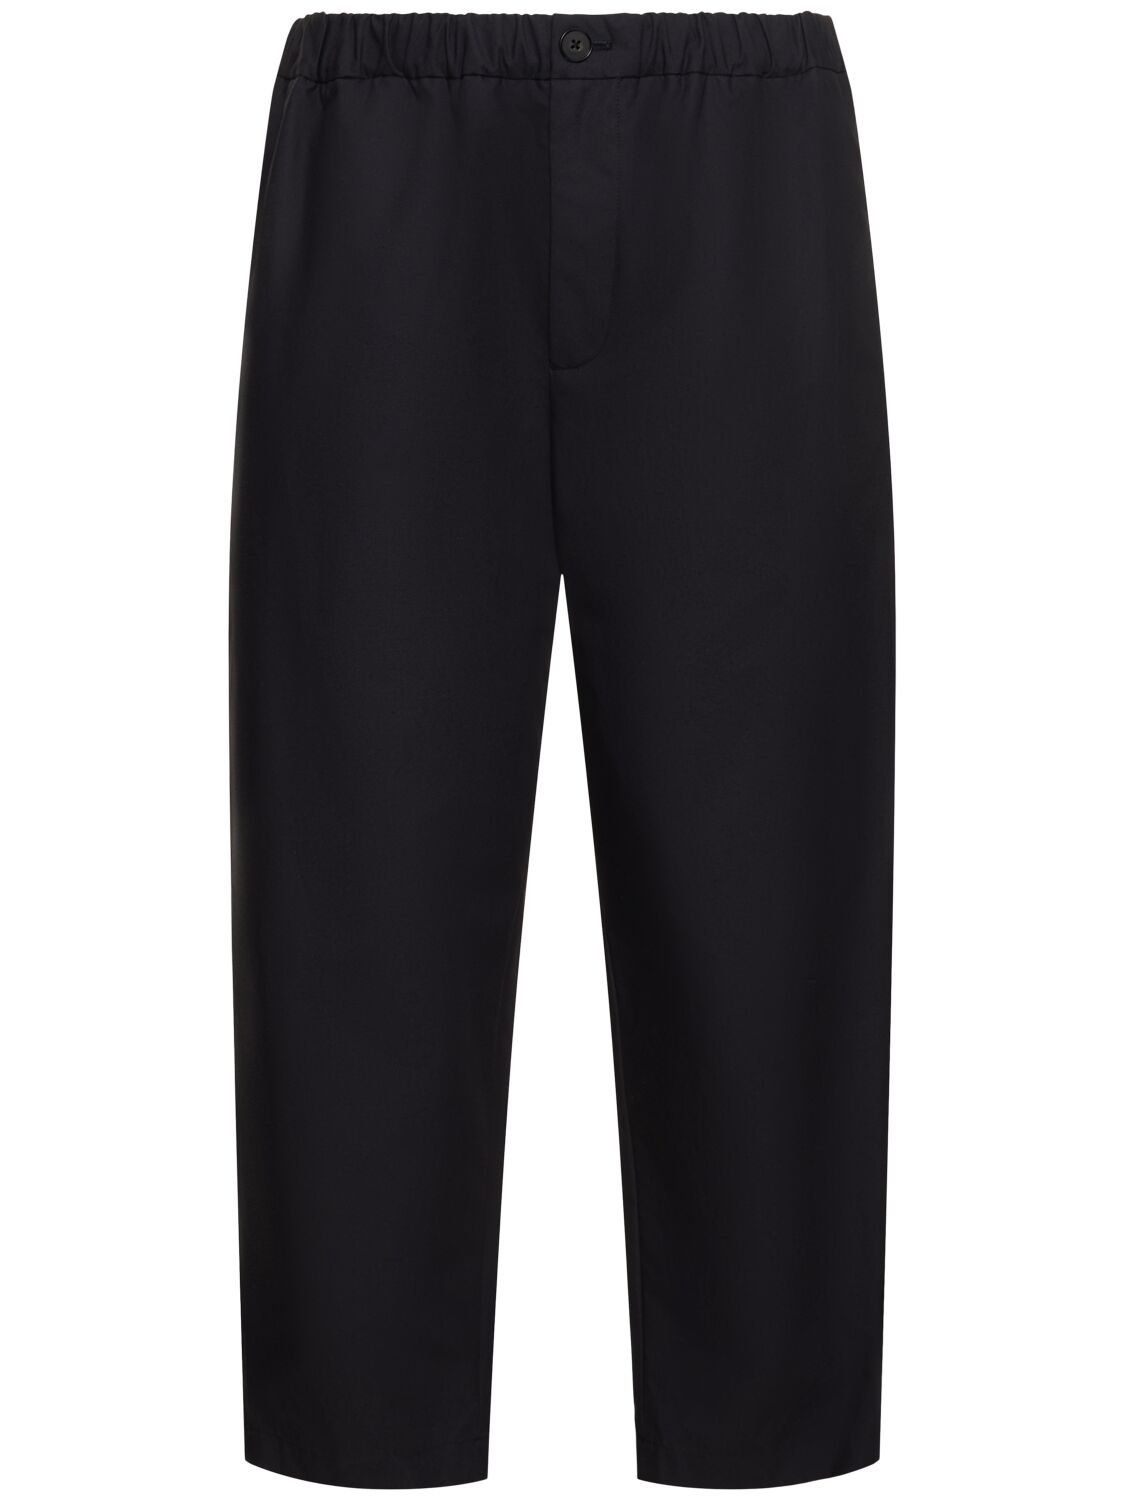 Image of Relaxed Fit Cotton Pants